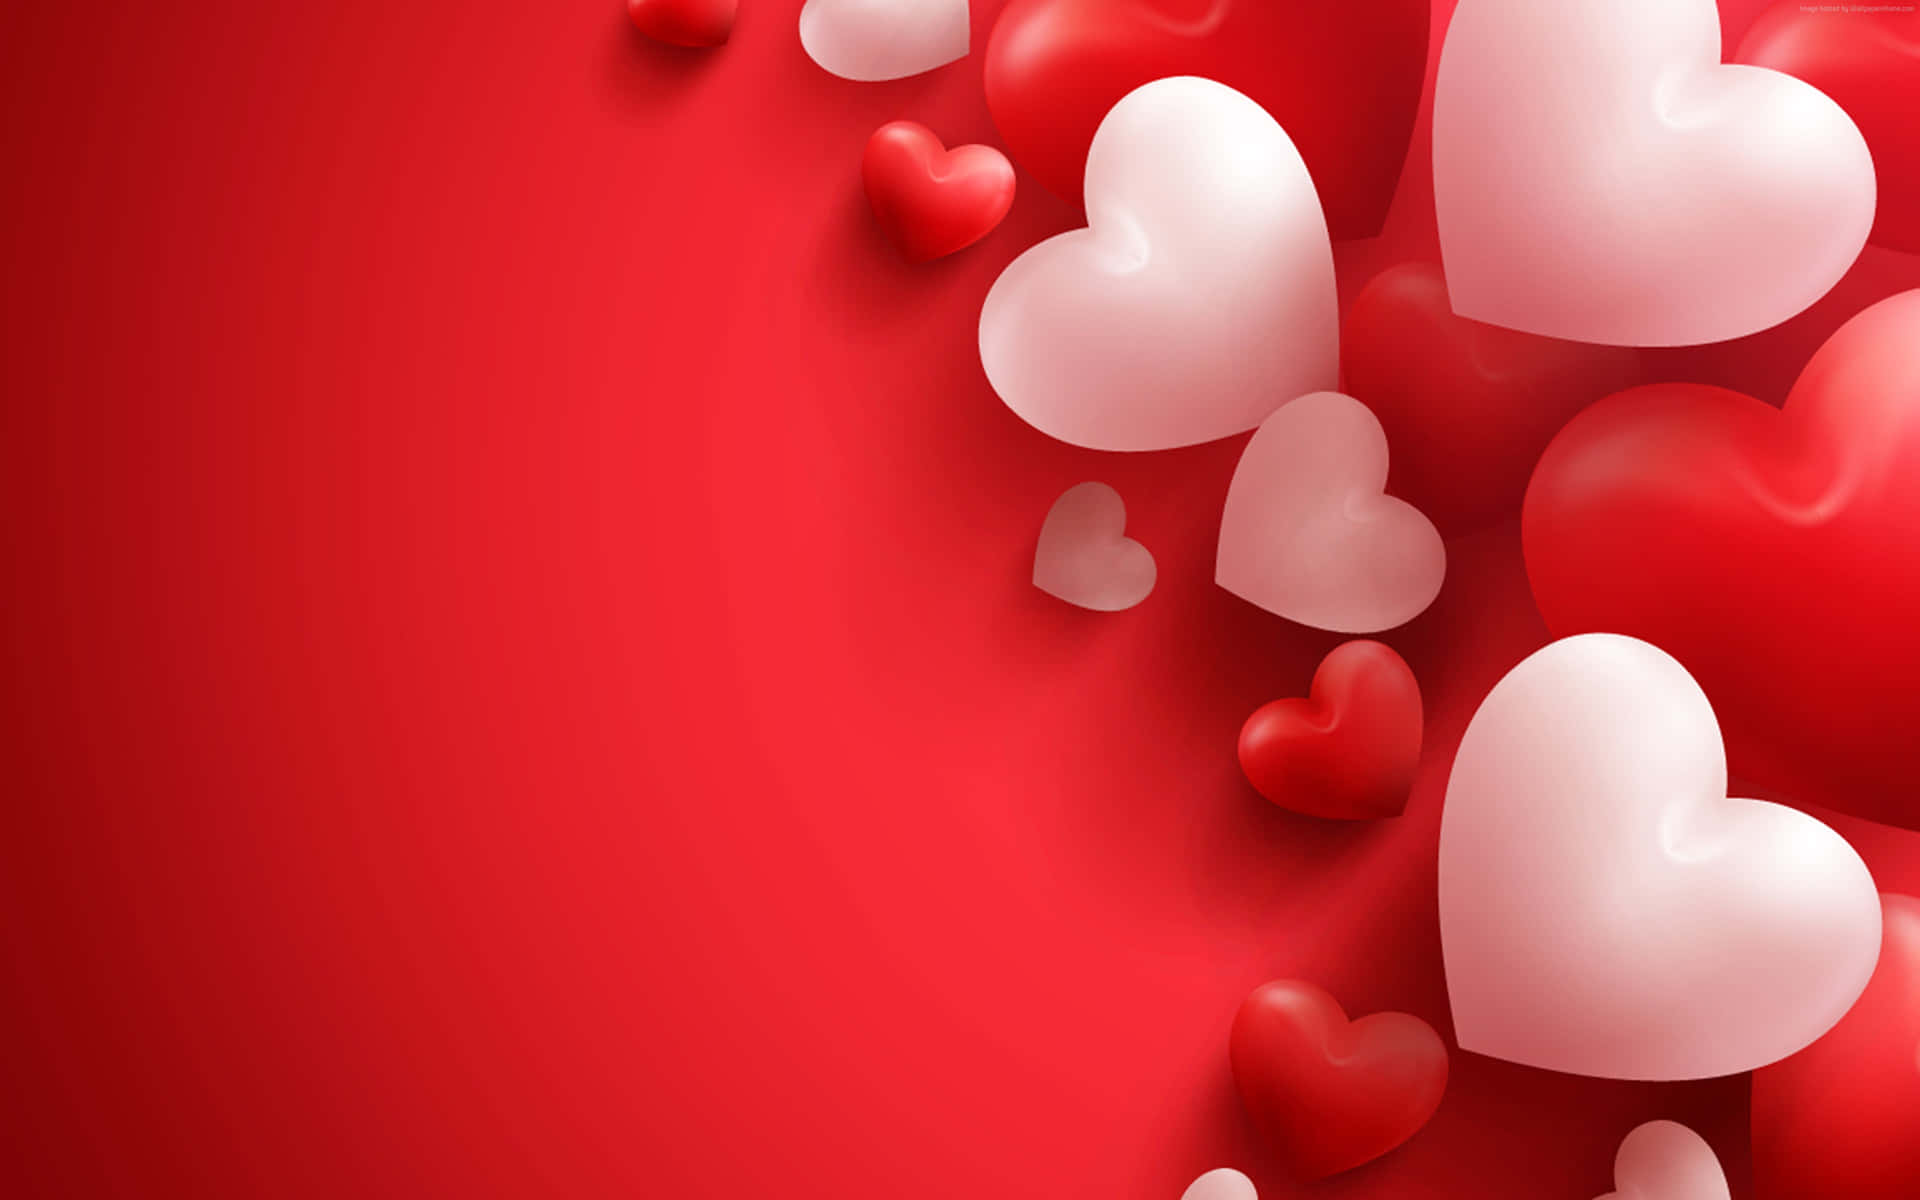 Show your love with Red Heart Wallpaper